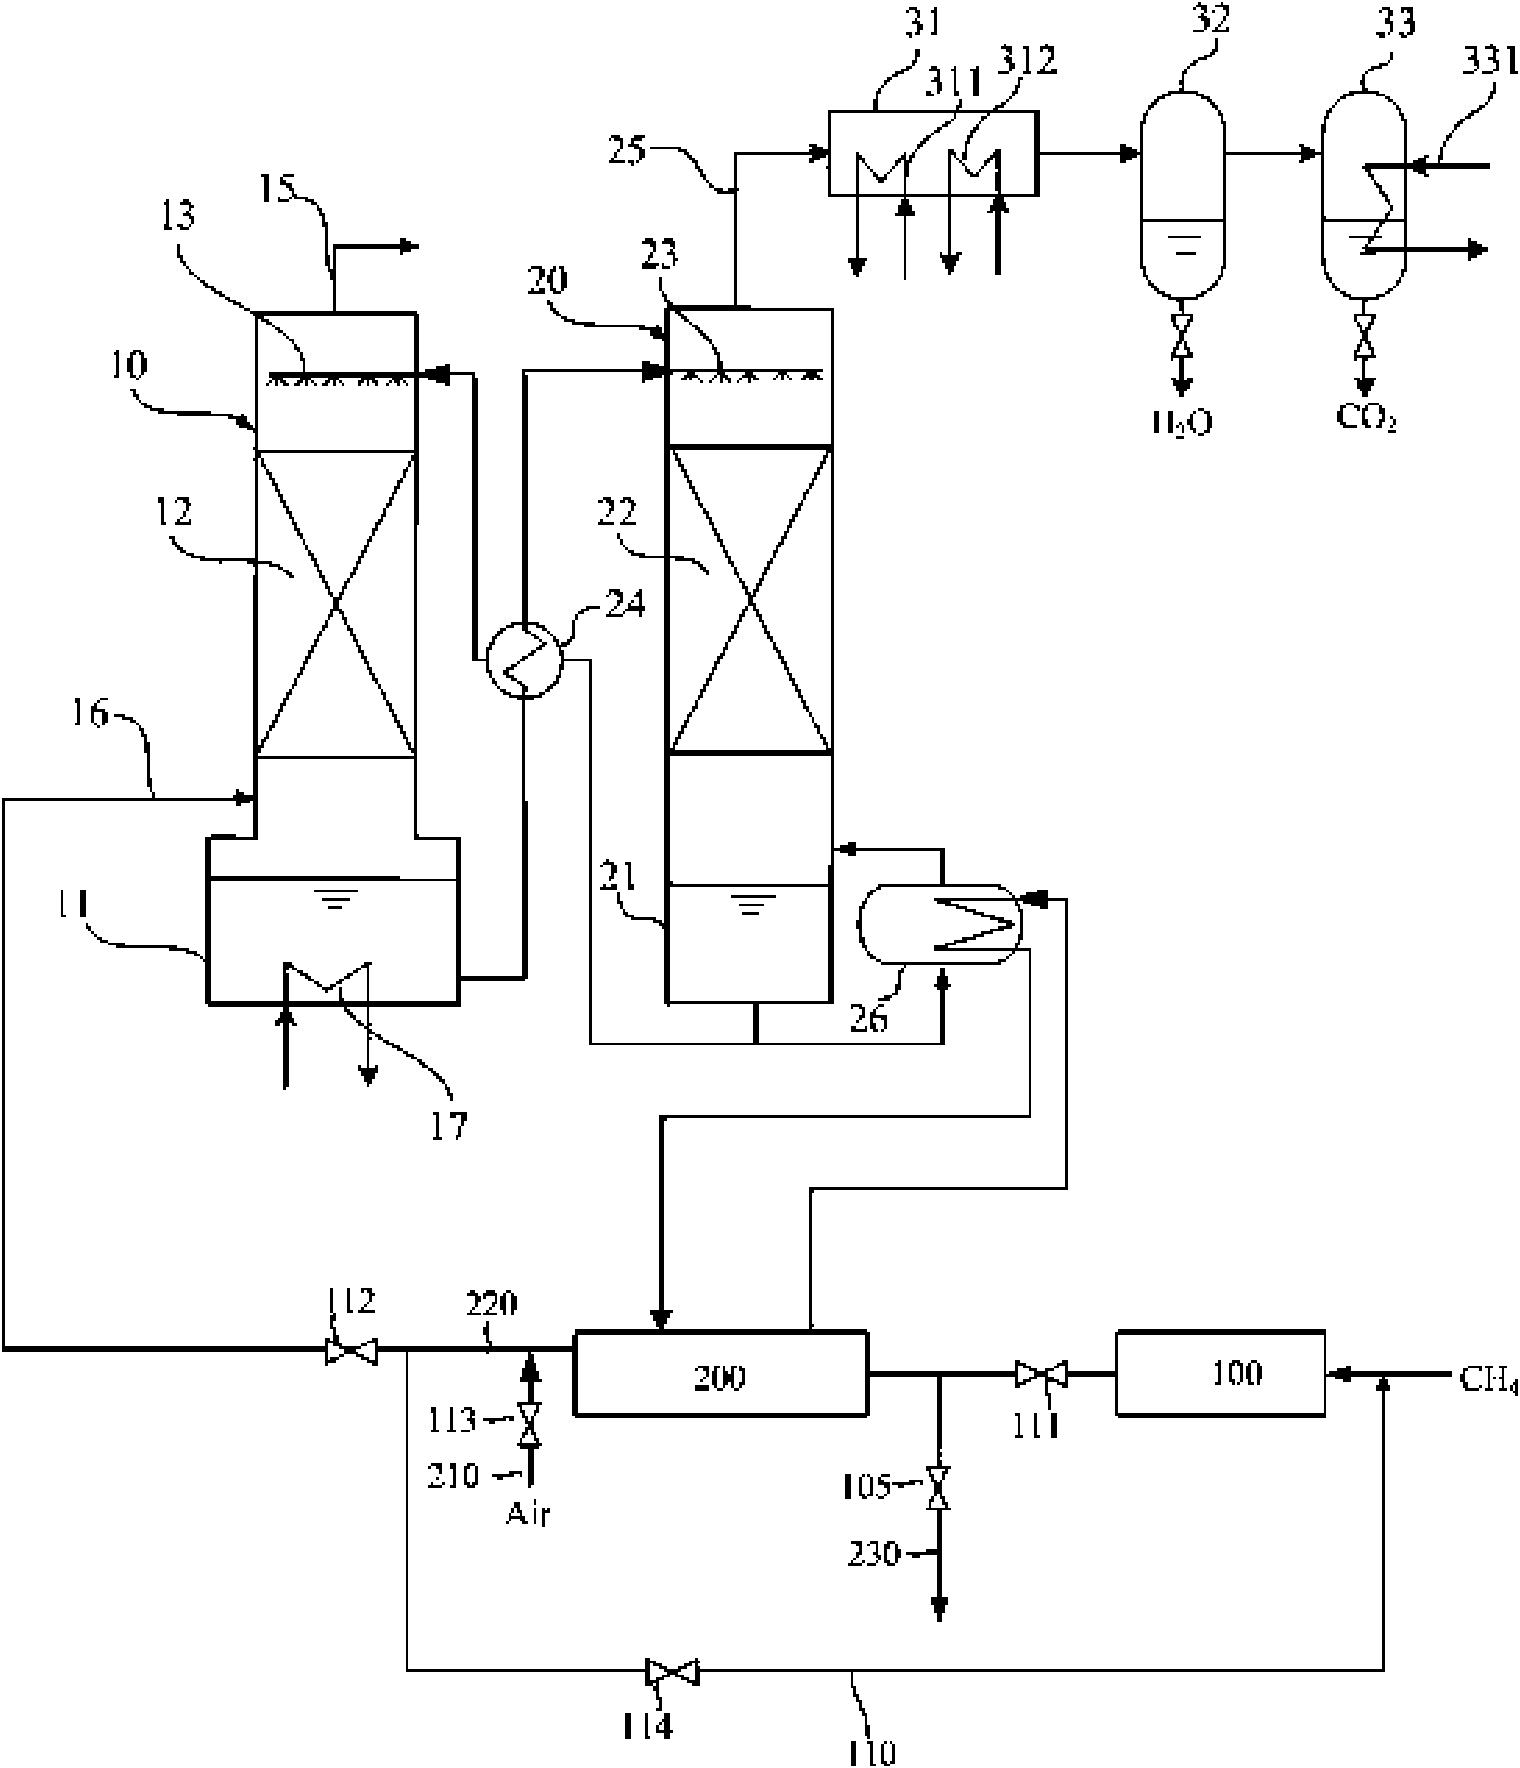 Heat-supply and carbon-dioxide capturing system and method